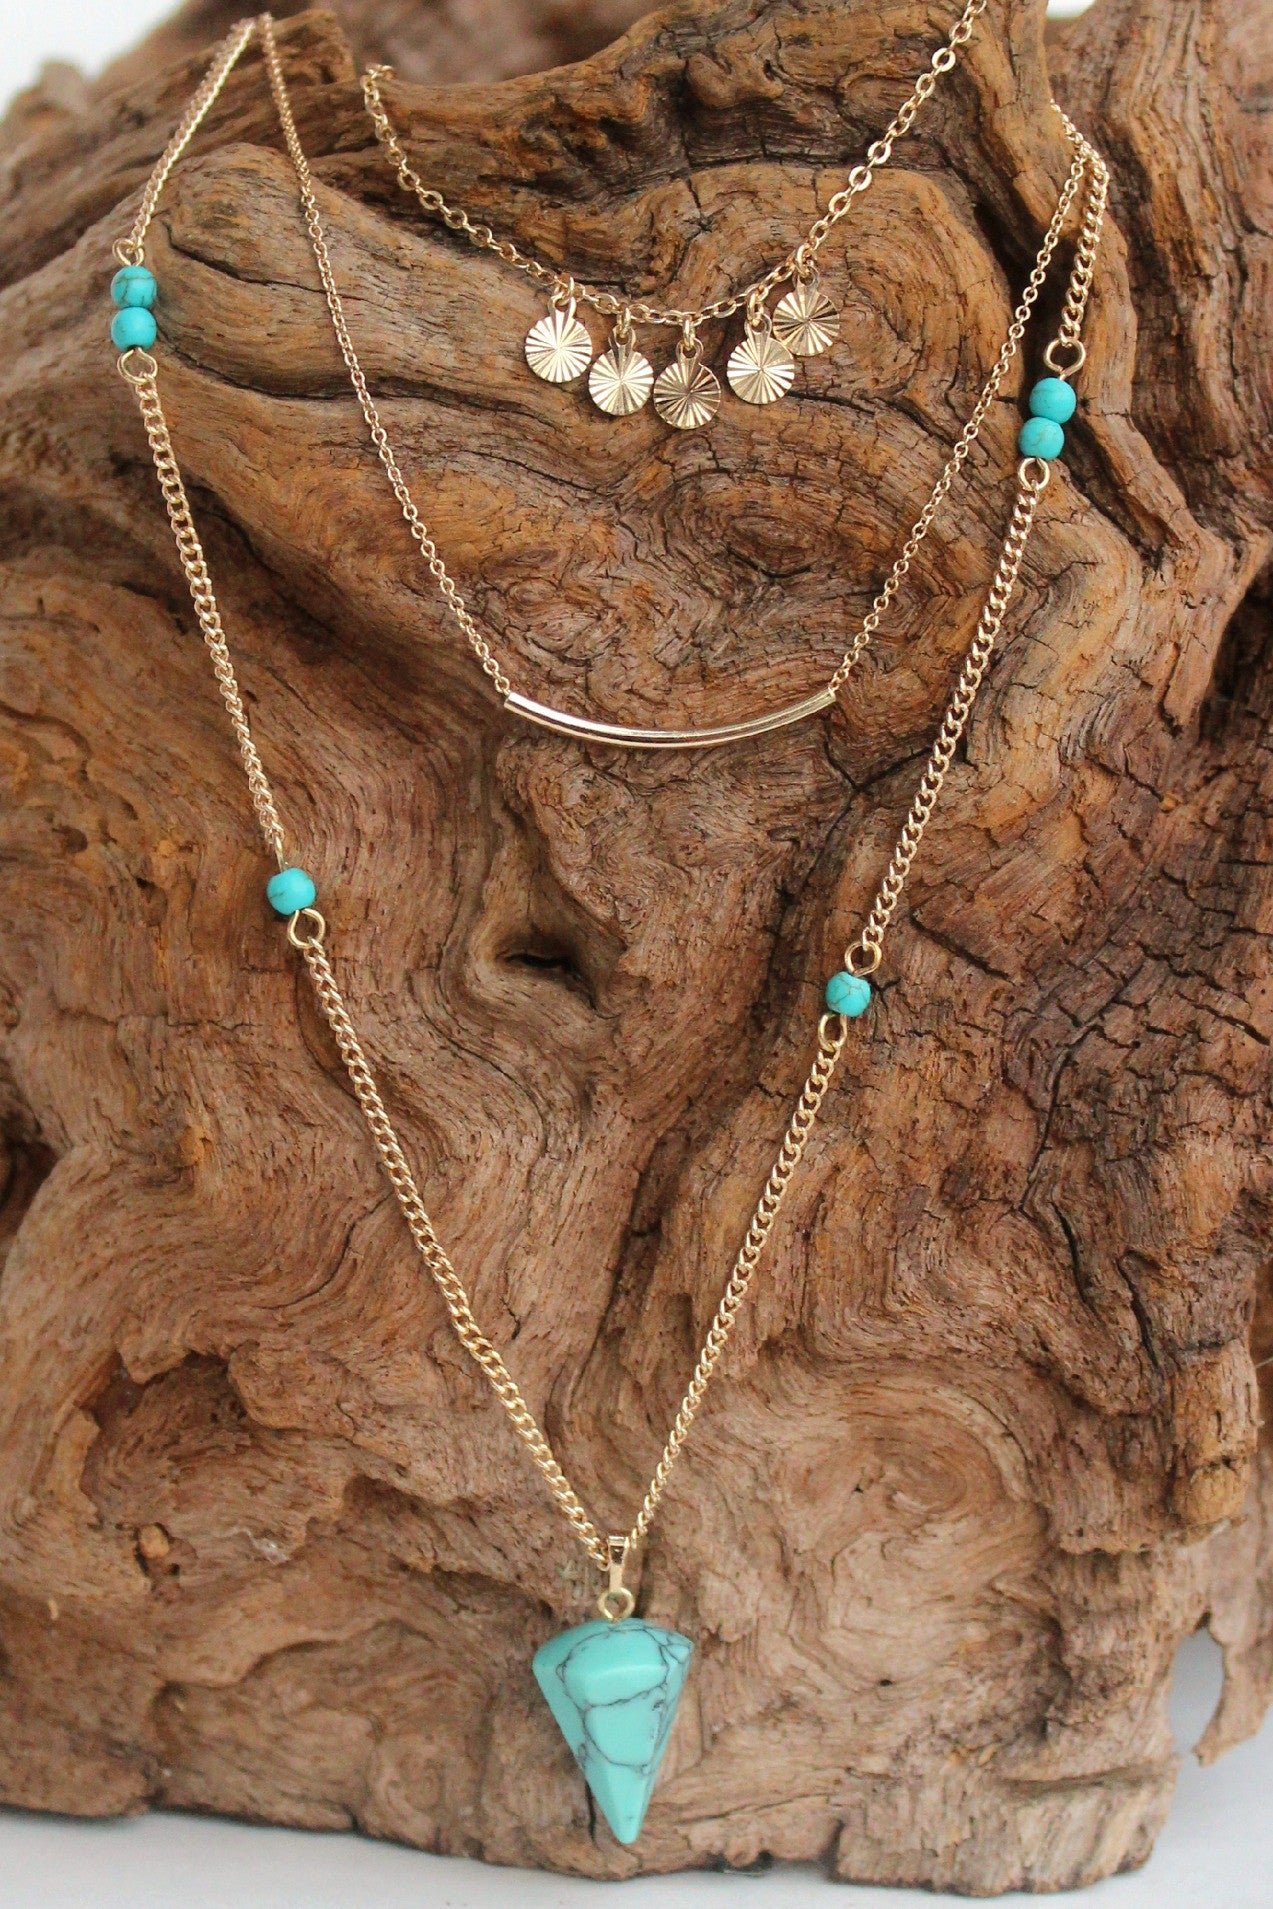 Layered Spike and Bar Necklace, Turquoise